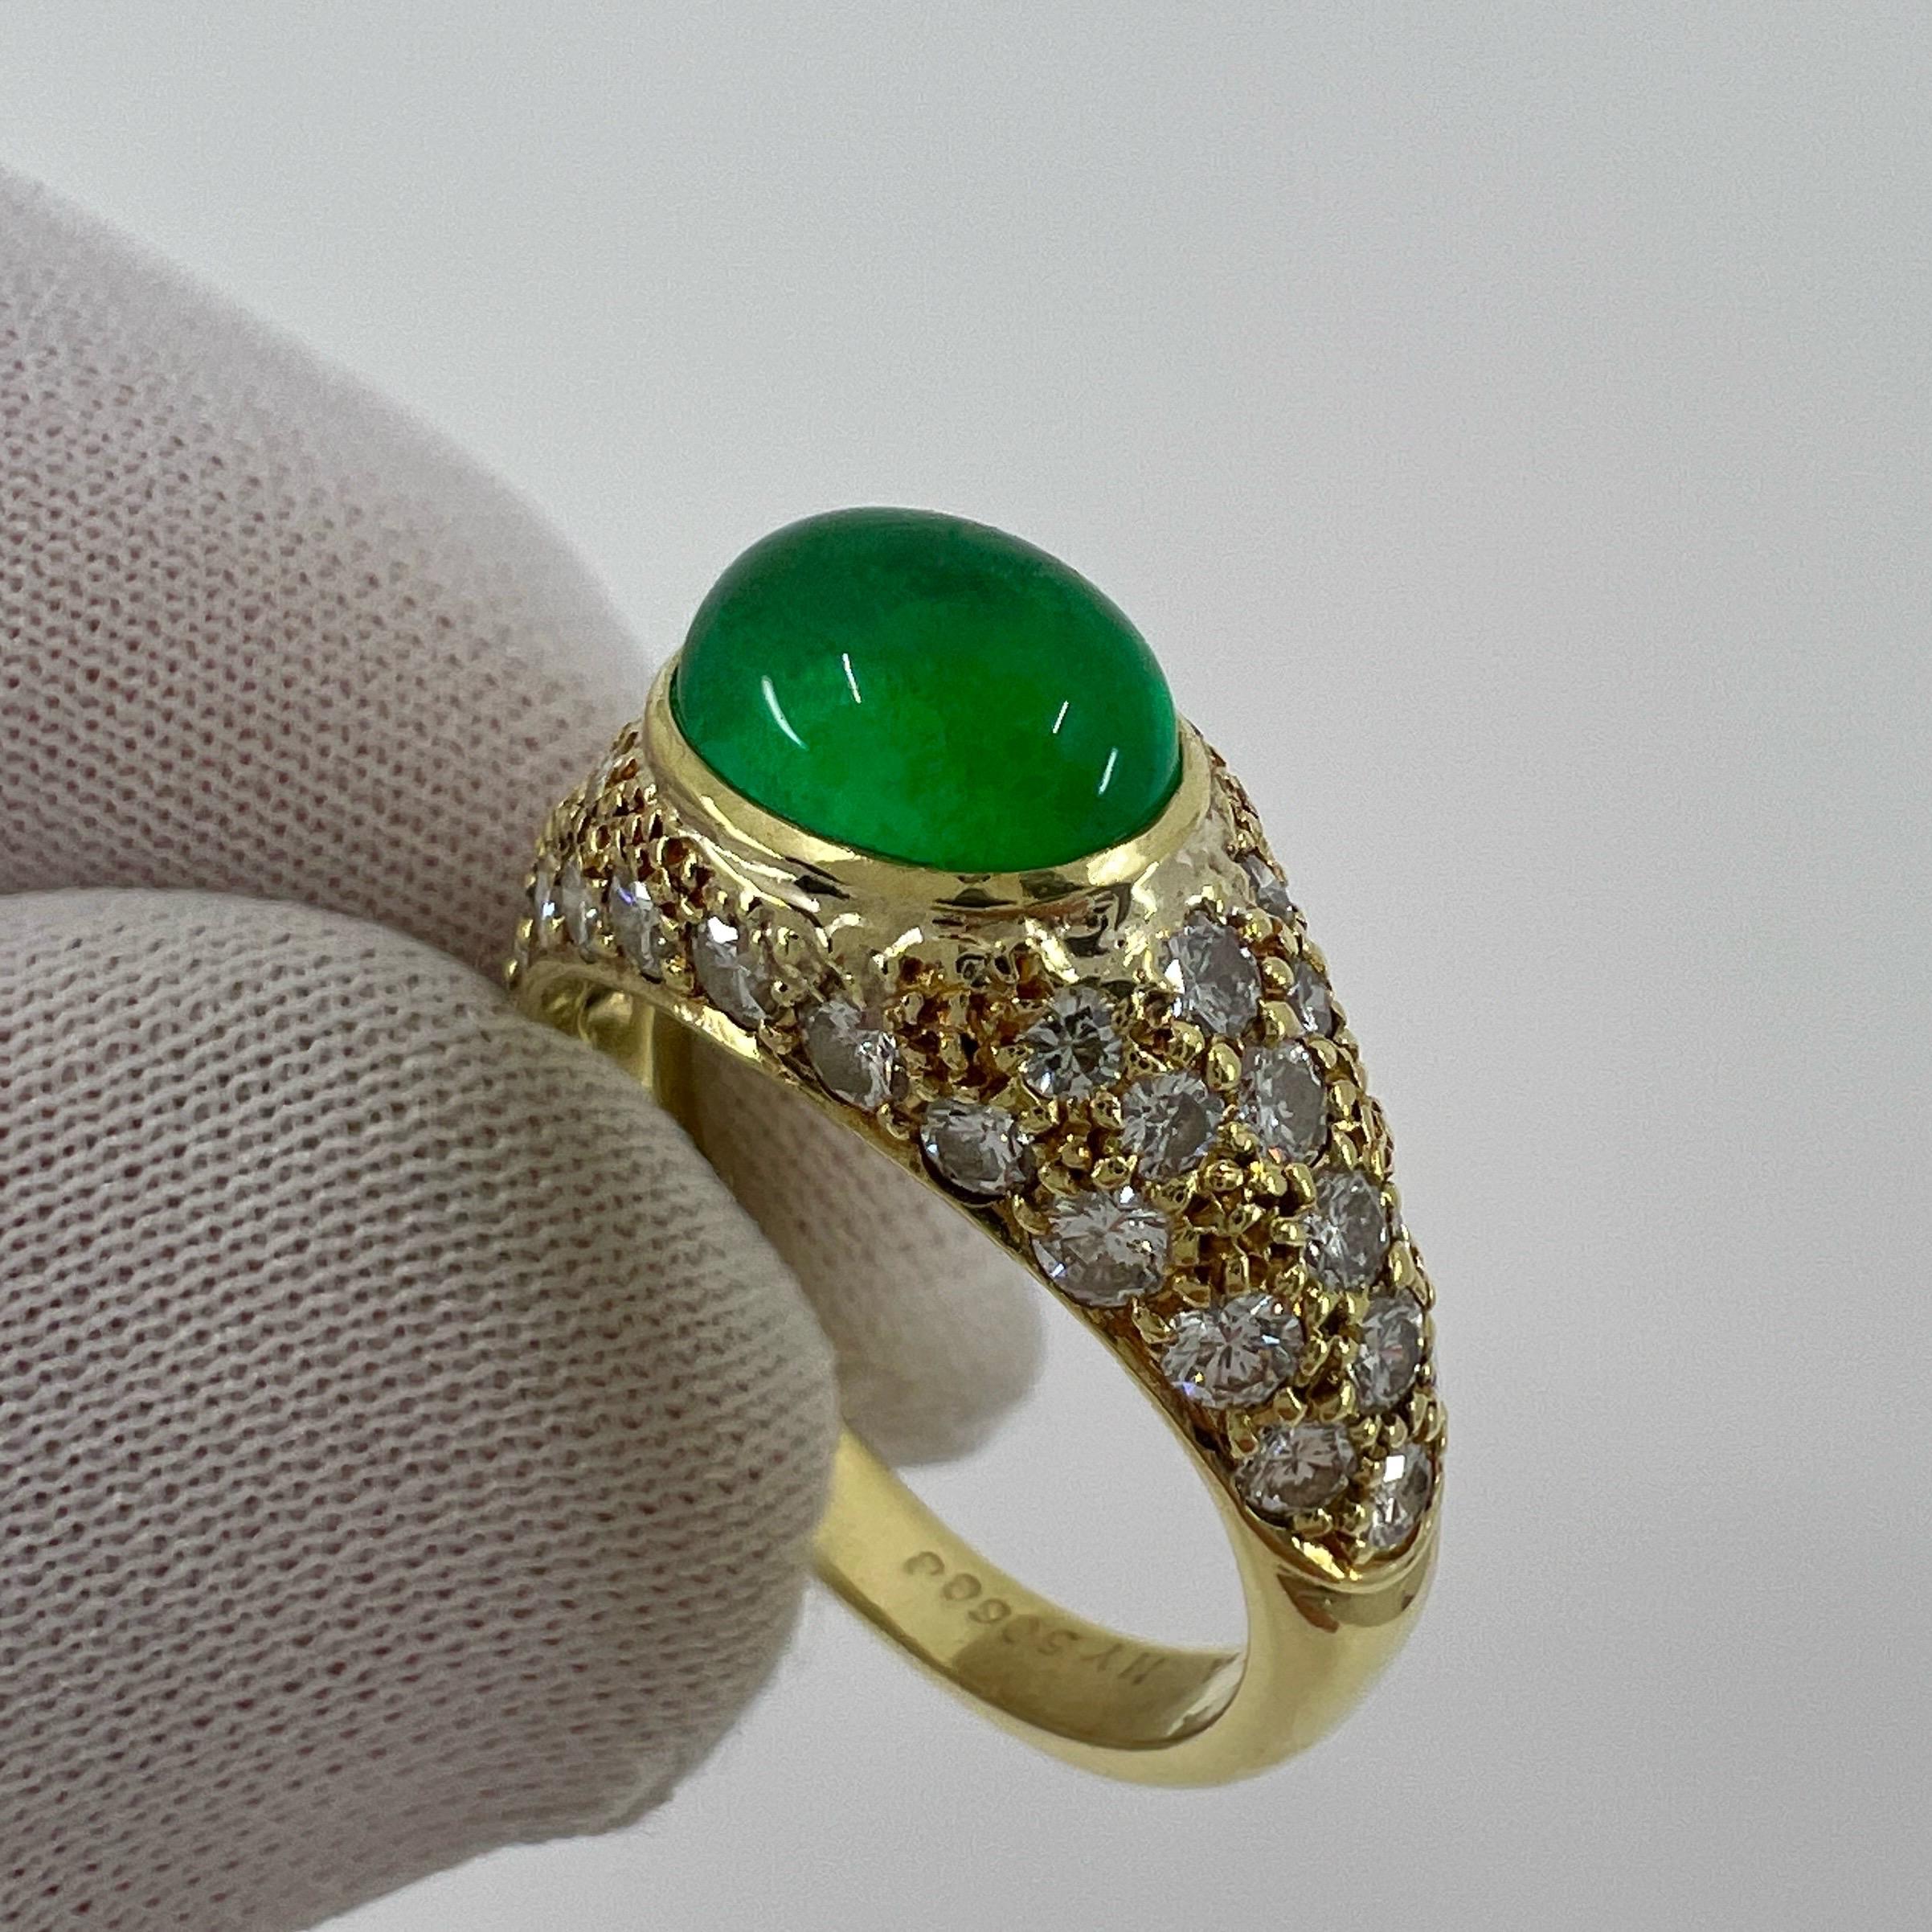 Rare Vintage Van Cleef & Arpels 2 Carat Emerald And Diamond Cocktail Dome Ring For Sale 5